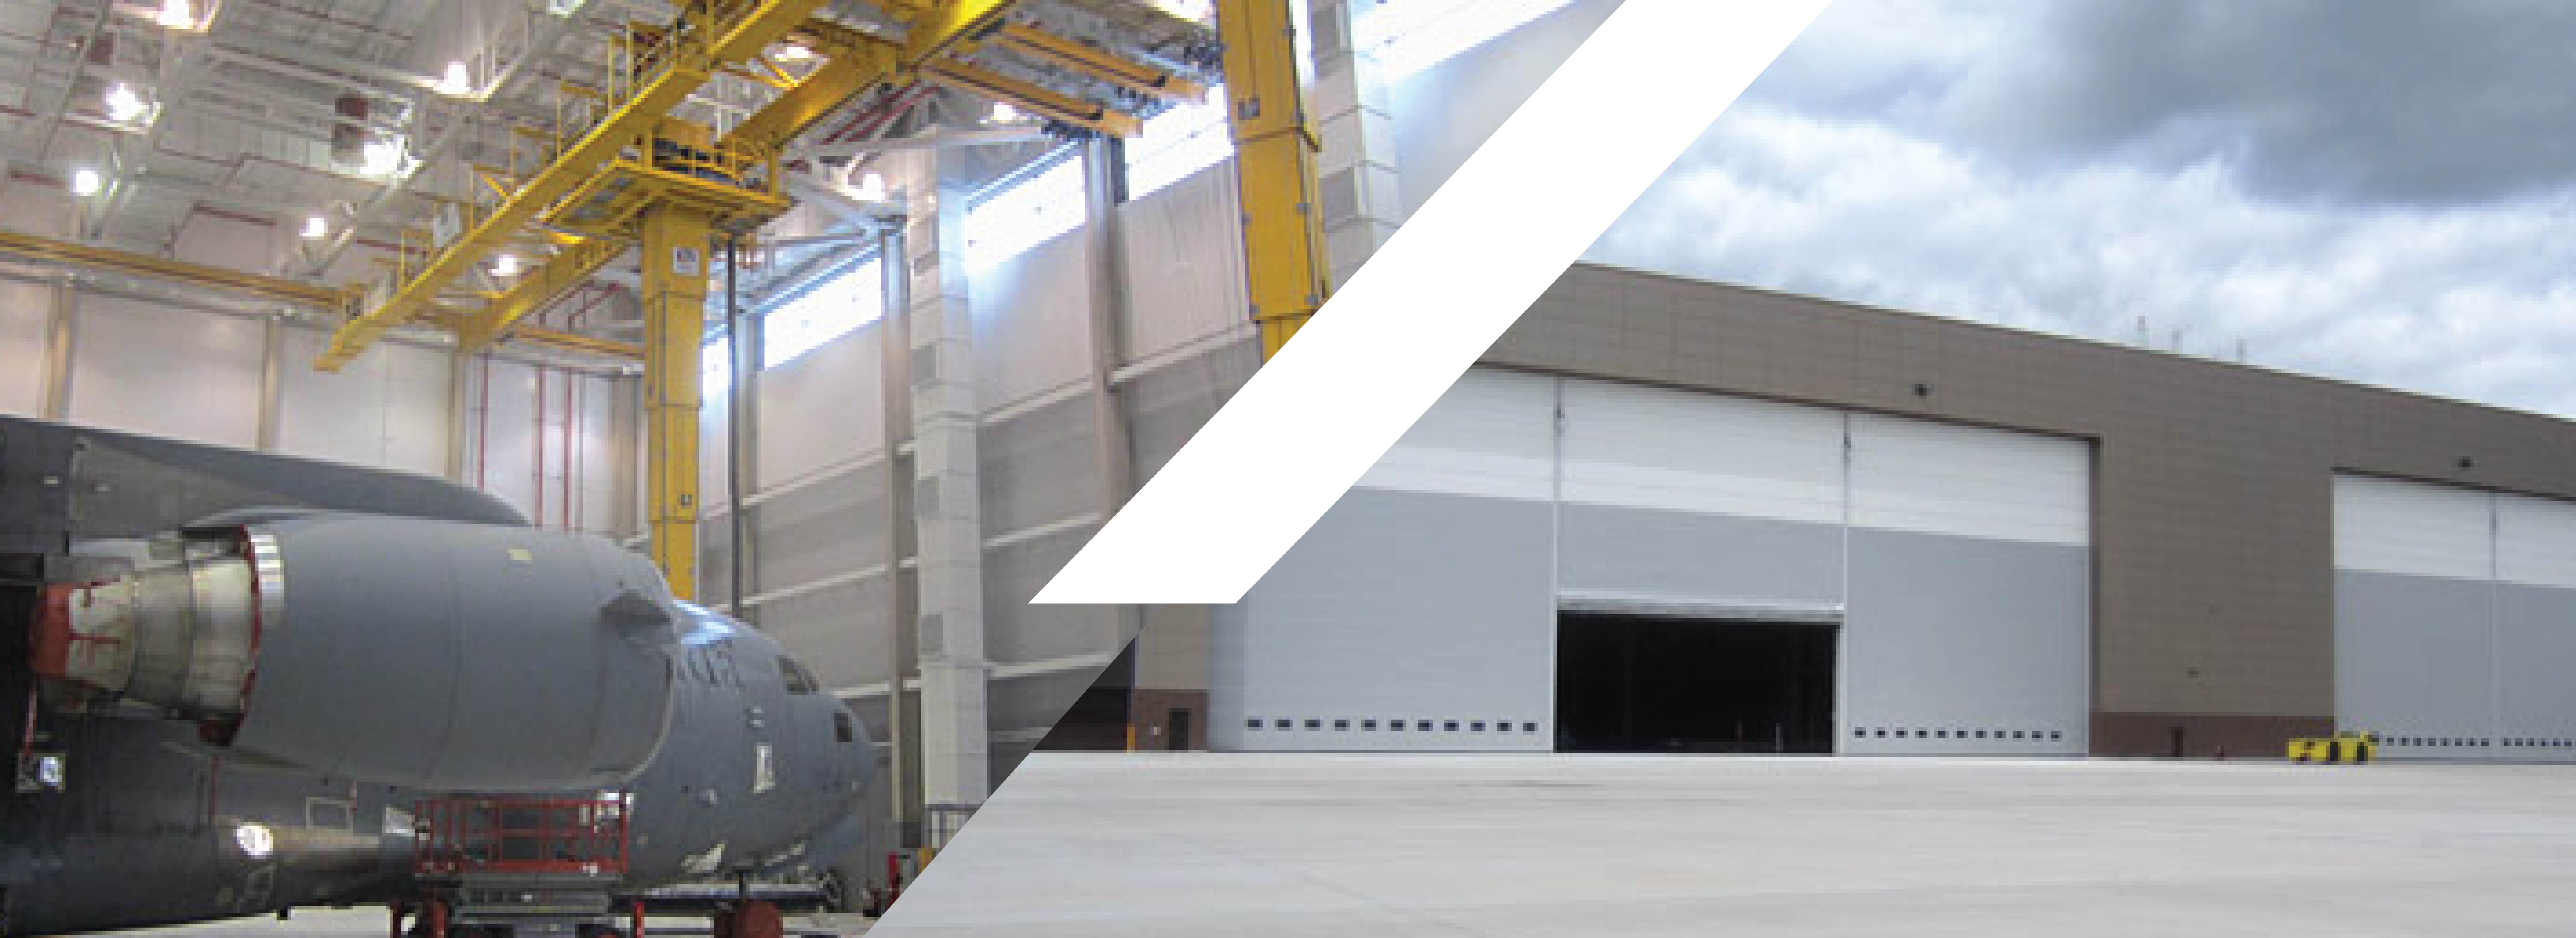 Plane hanger with large plane and exterior image of hanger with three large doors